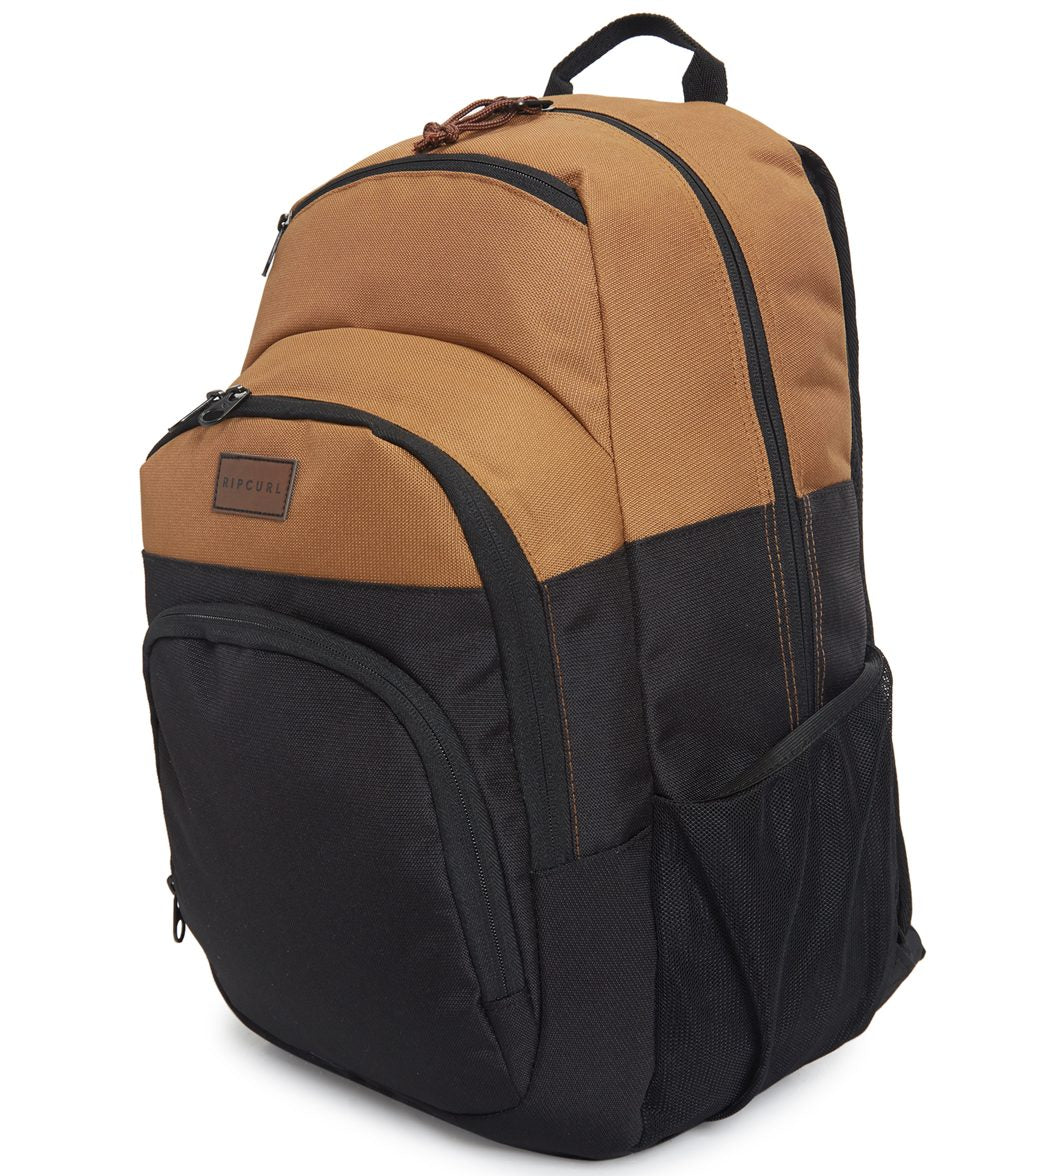 Rip Curl, Rip Curl Overtime Backpack Black